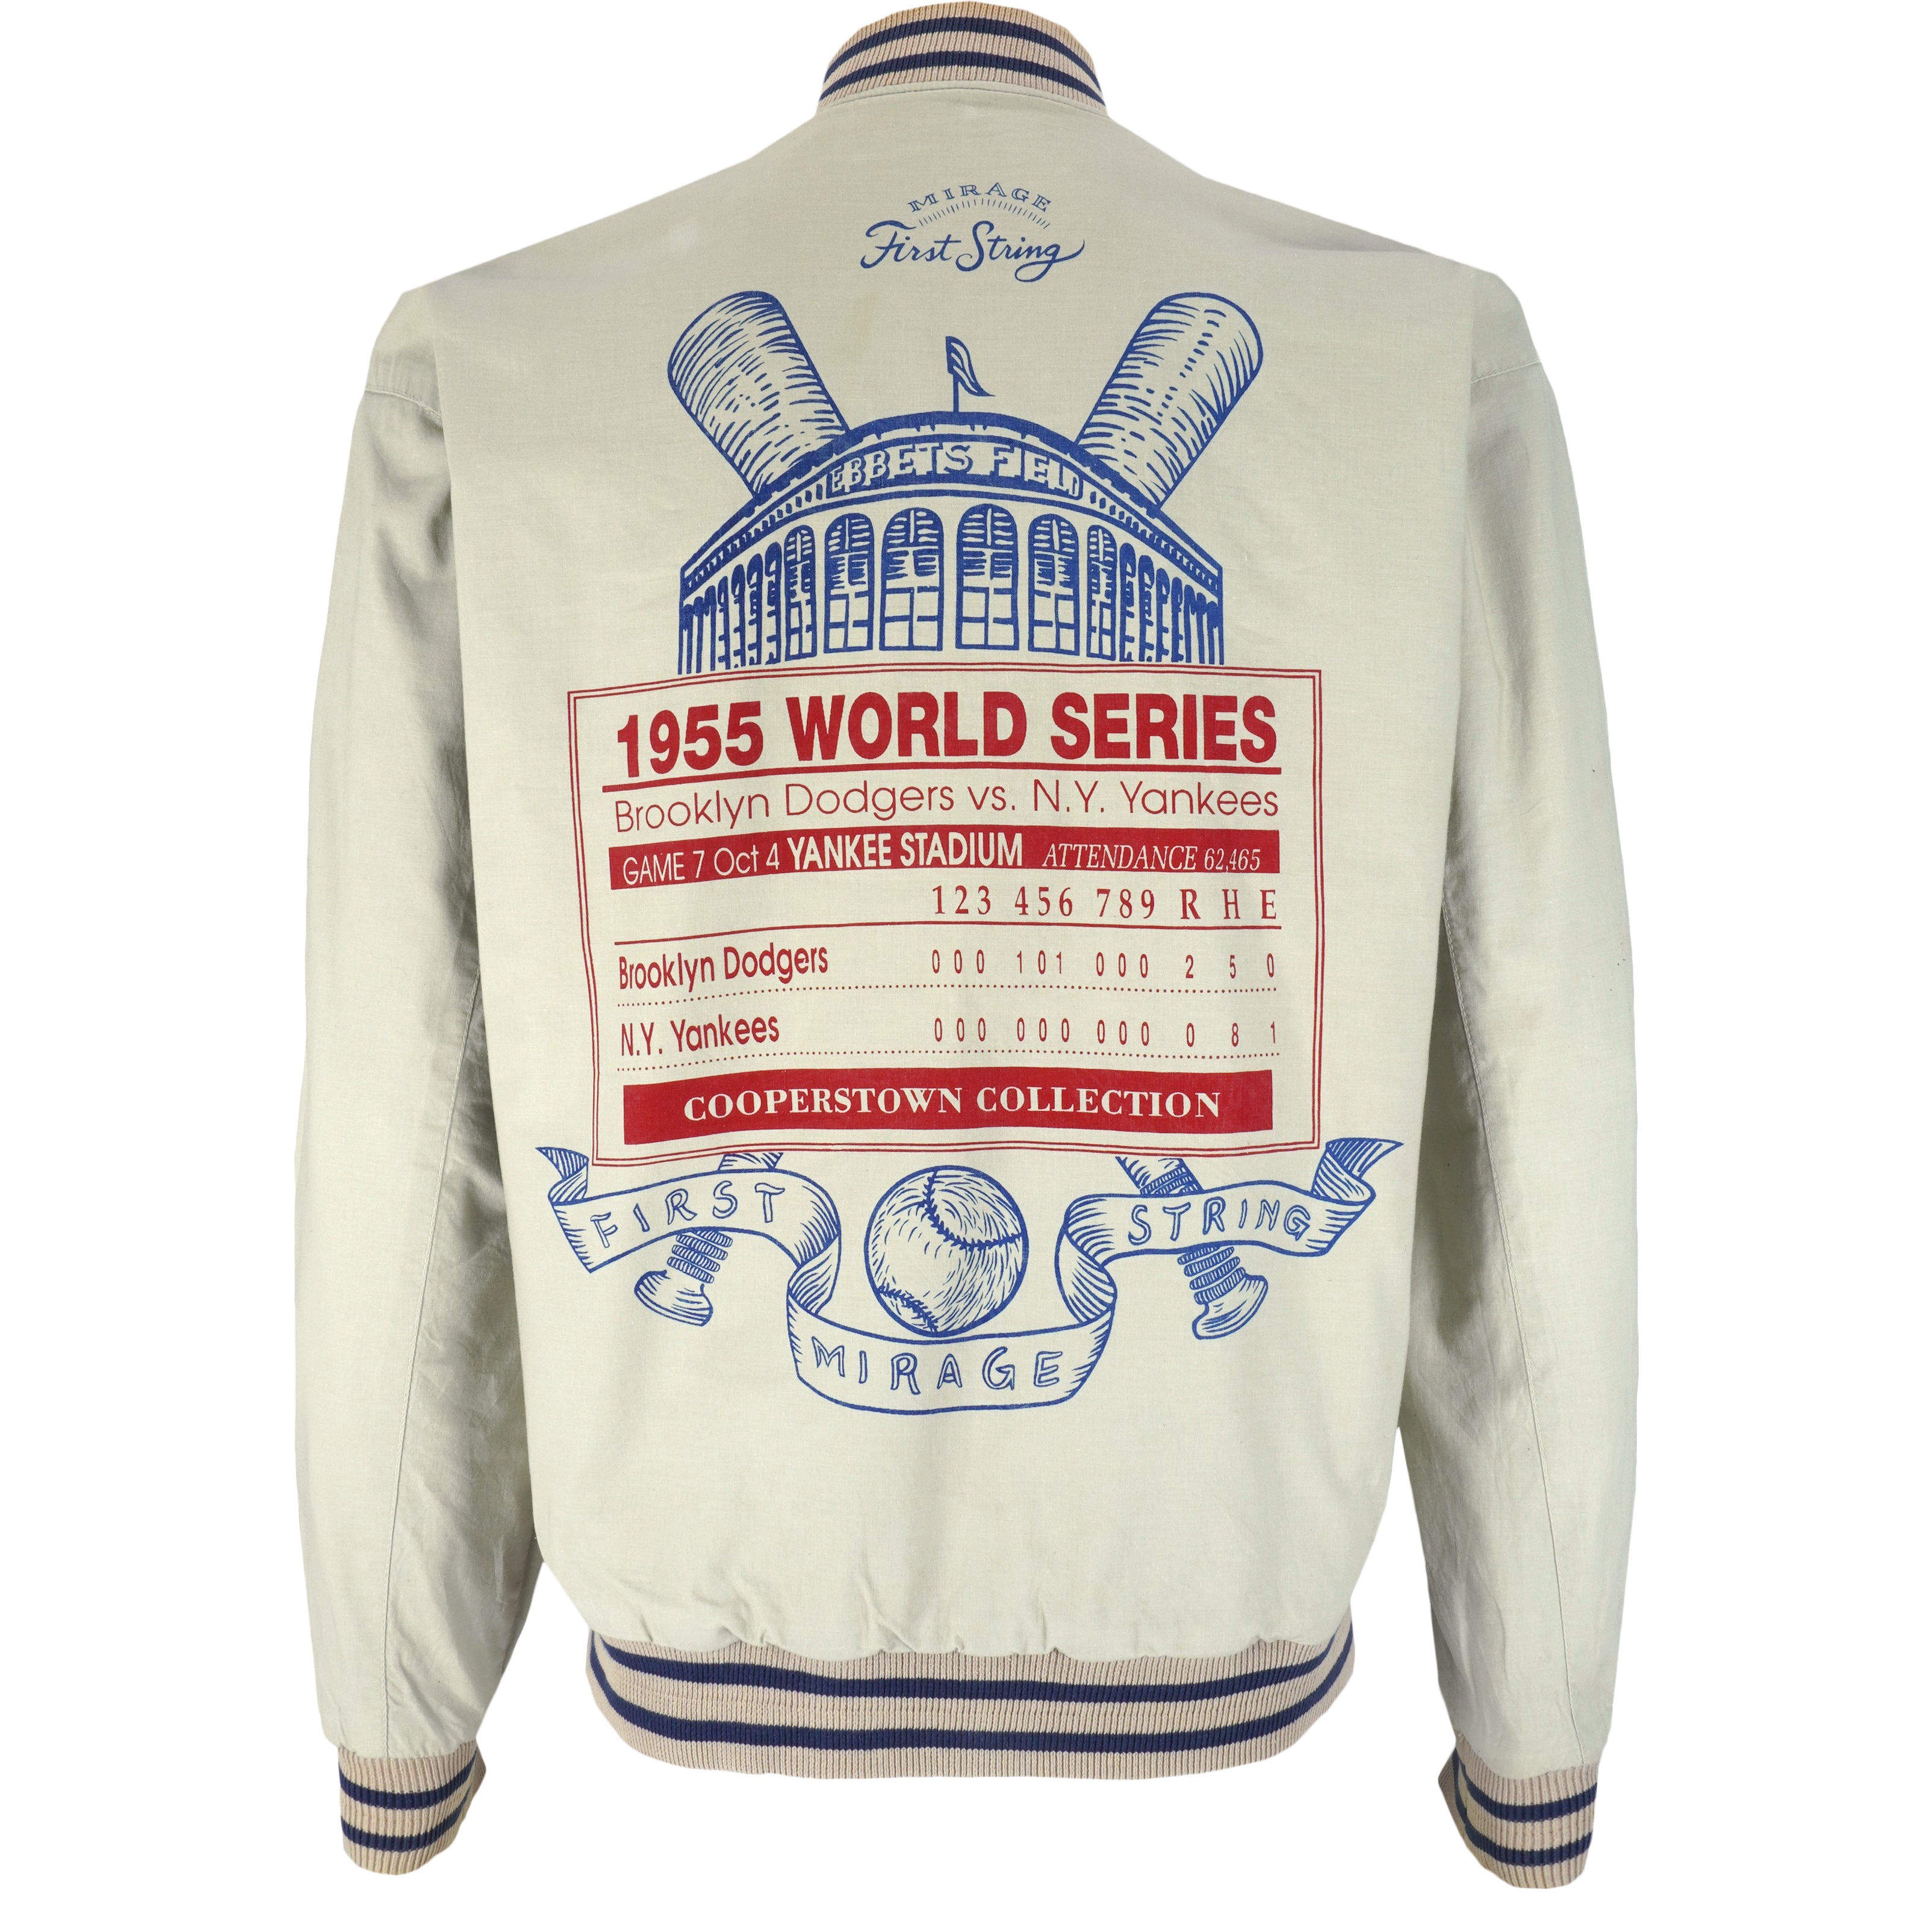 The Brooklyn Dodgers win the World Series-October 4, 1955 - NY